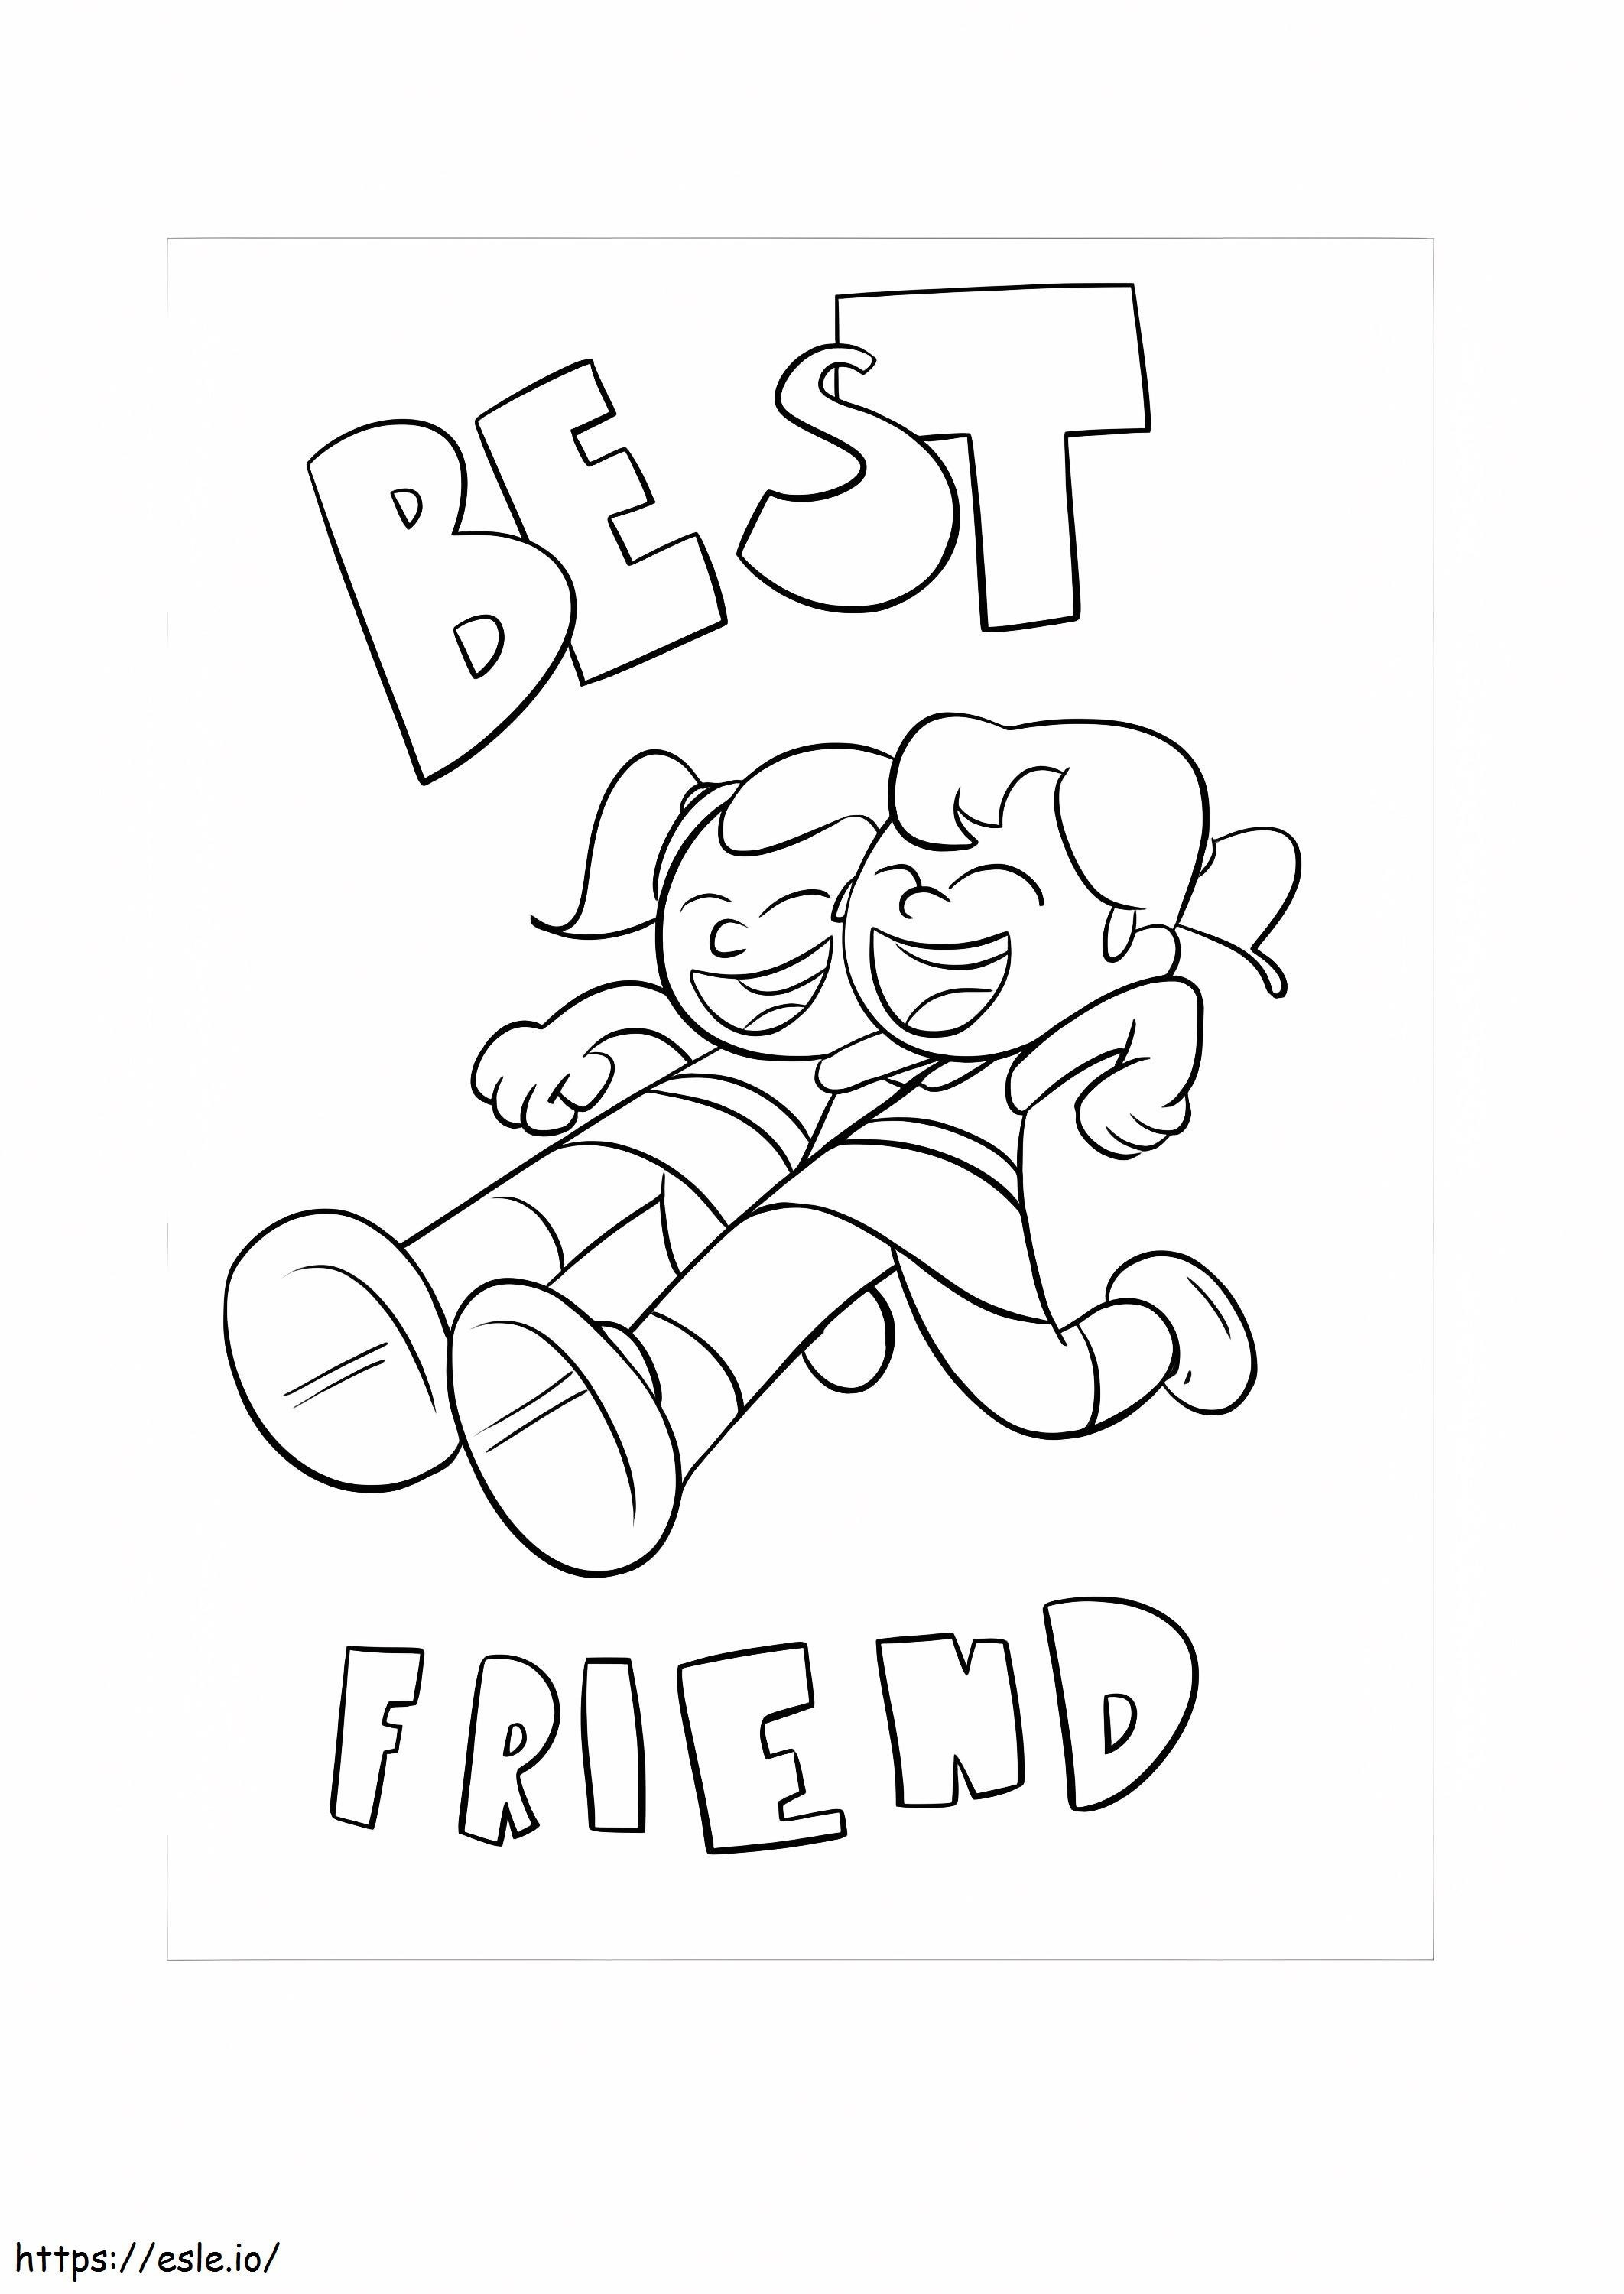 Two Girlfriends Running coloring page